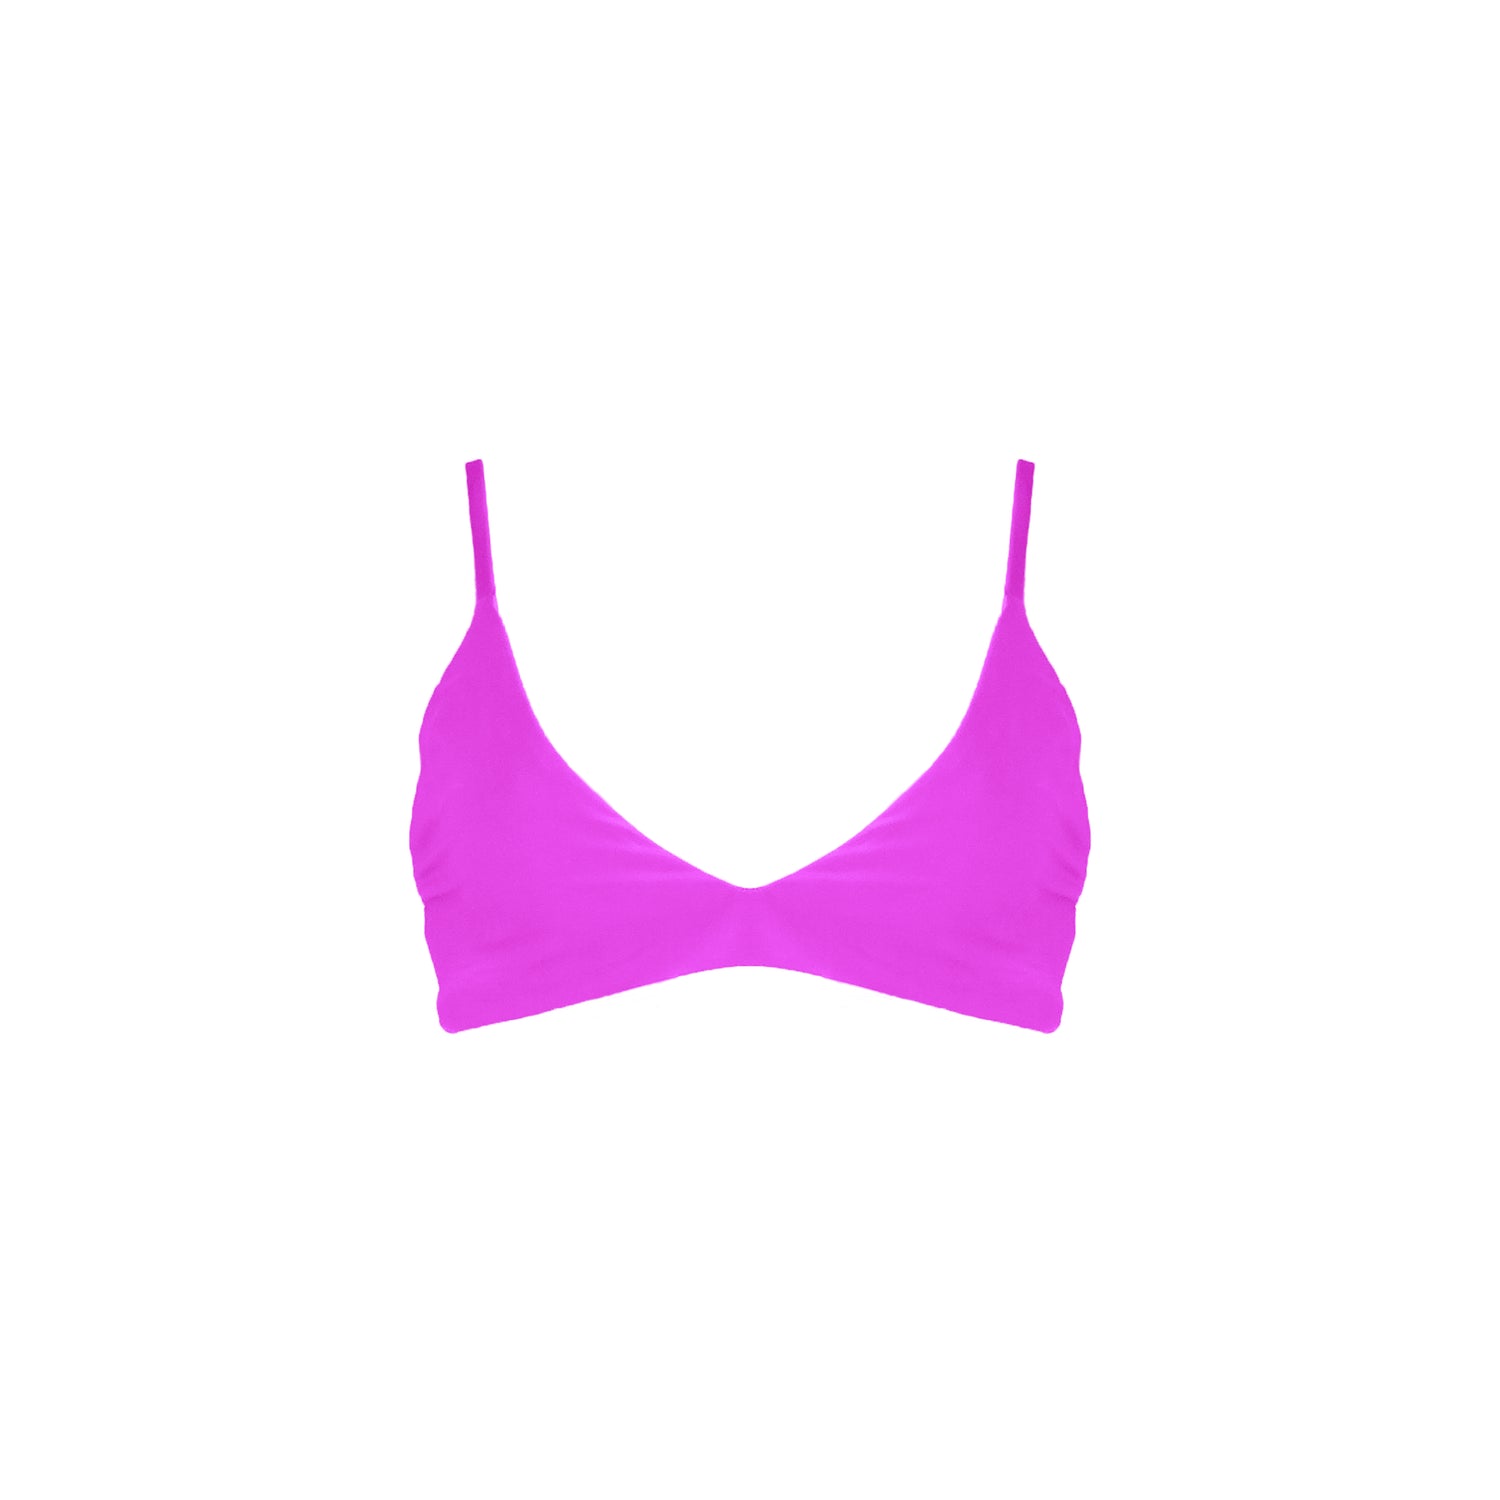 Barbie pink Bralette style bikini top with strappy back details.